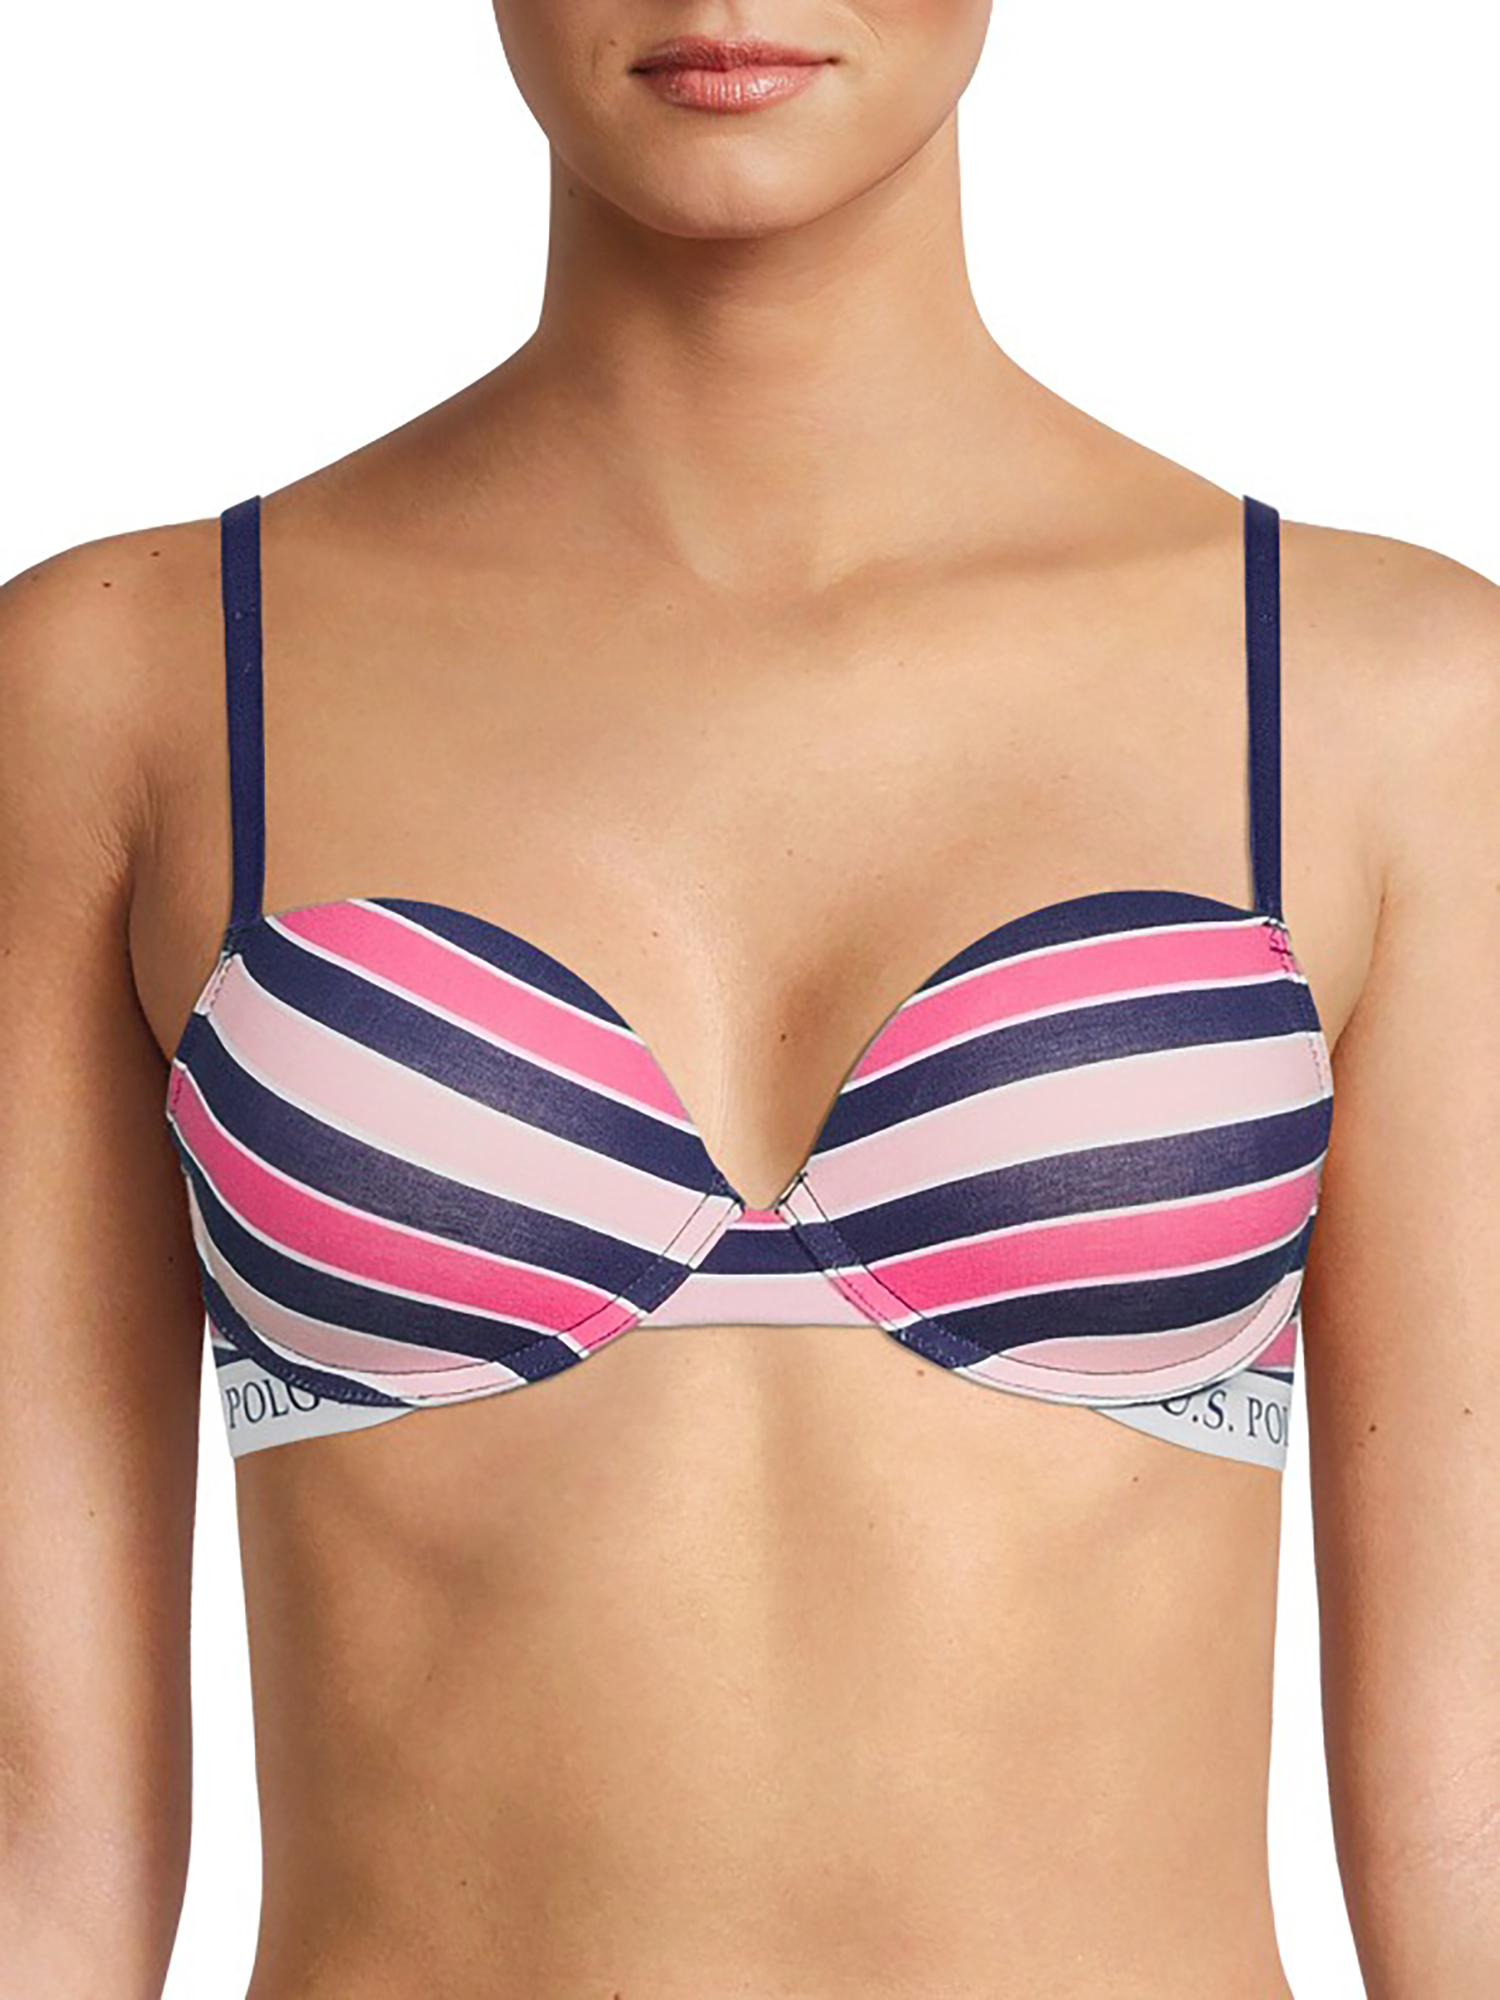 U.S. Polo Assn. Women's 3 Pack Tag-Free Cotton Spandex Push Up Bra Set - image 2 of 3